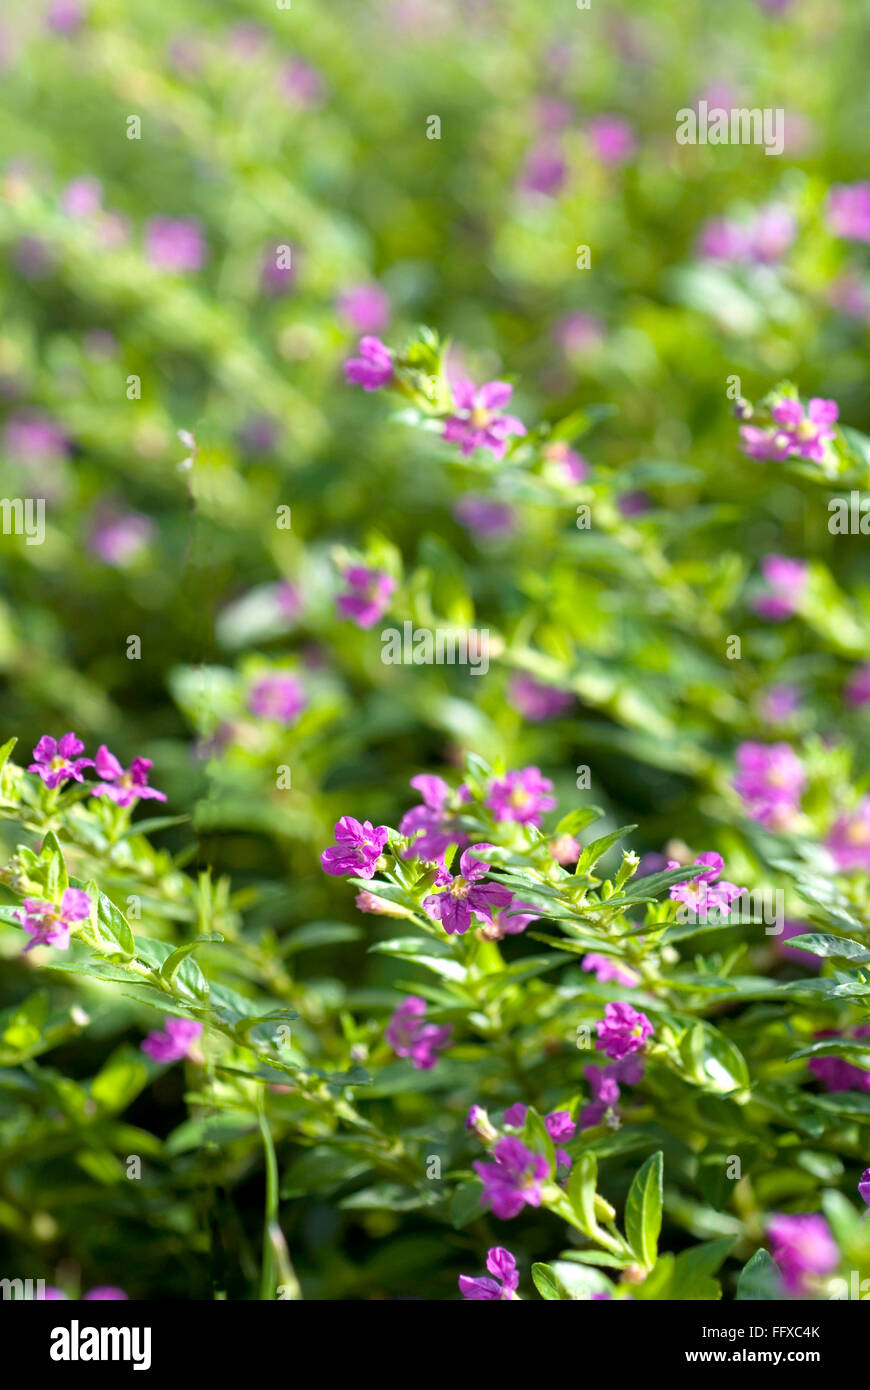 False heather Mexican heather Hedge plant pink small flowers Cuphea hyssopifolia Kunth Synonym: Parsonsia hyssopifolia Stock Photo